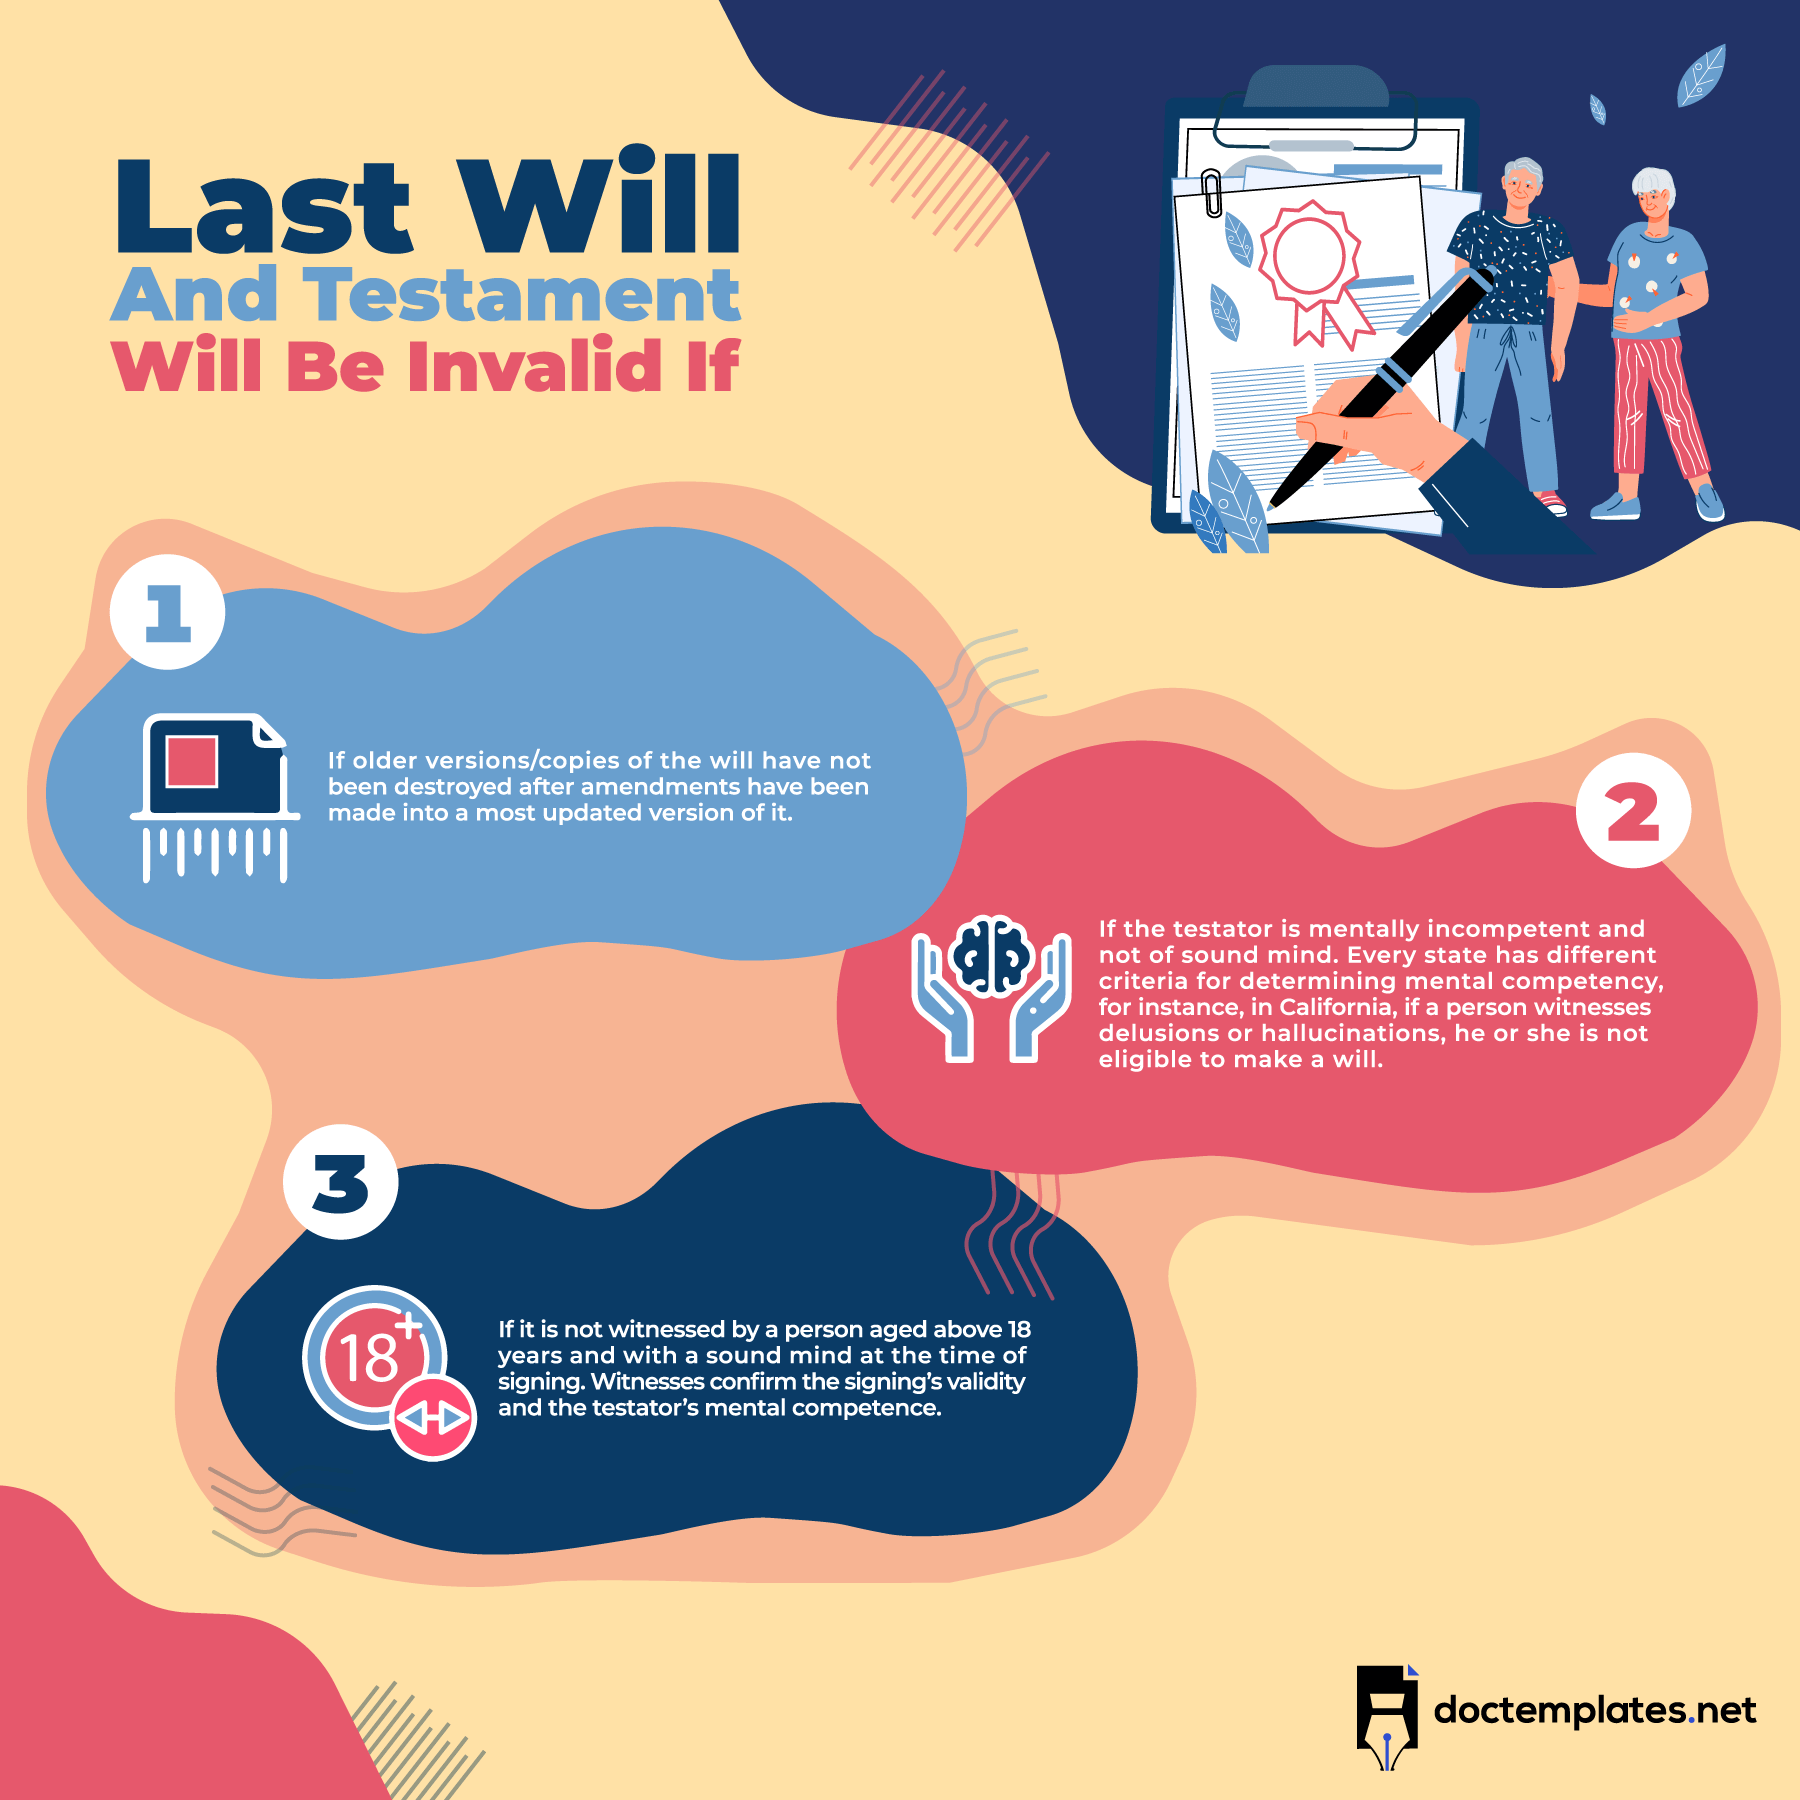 This infographic is about invalidity of last will and testament.